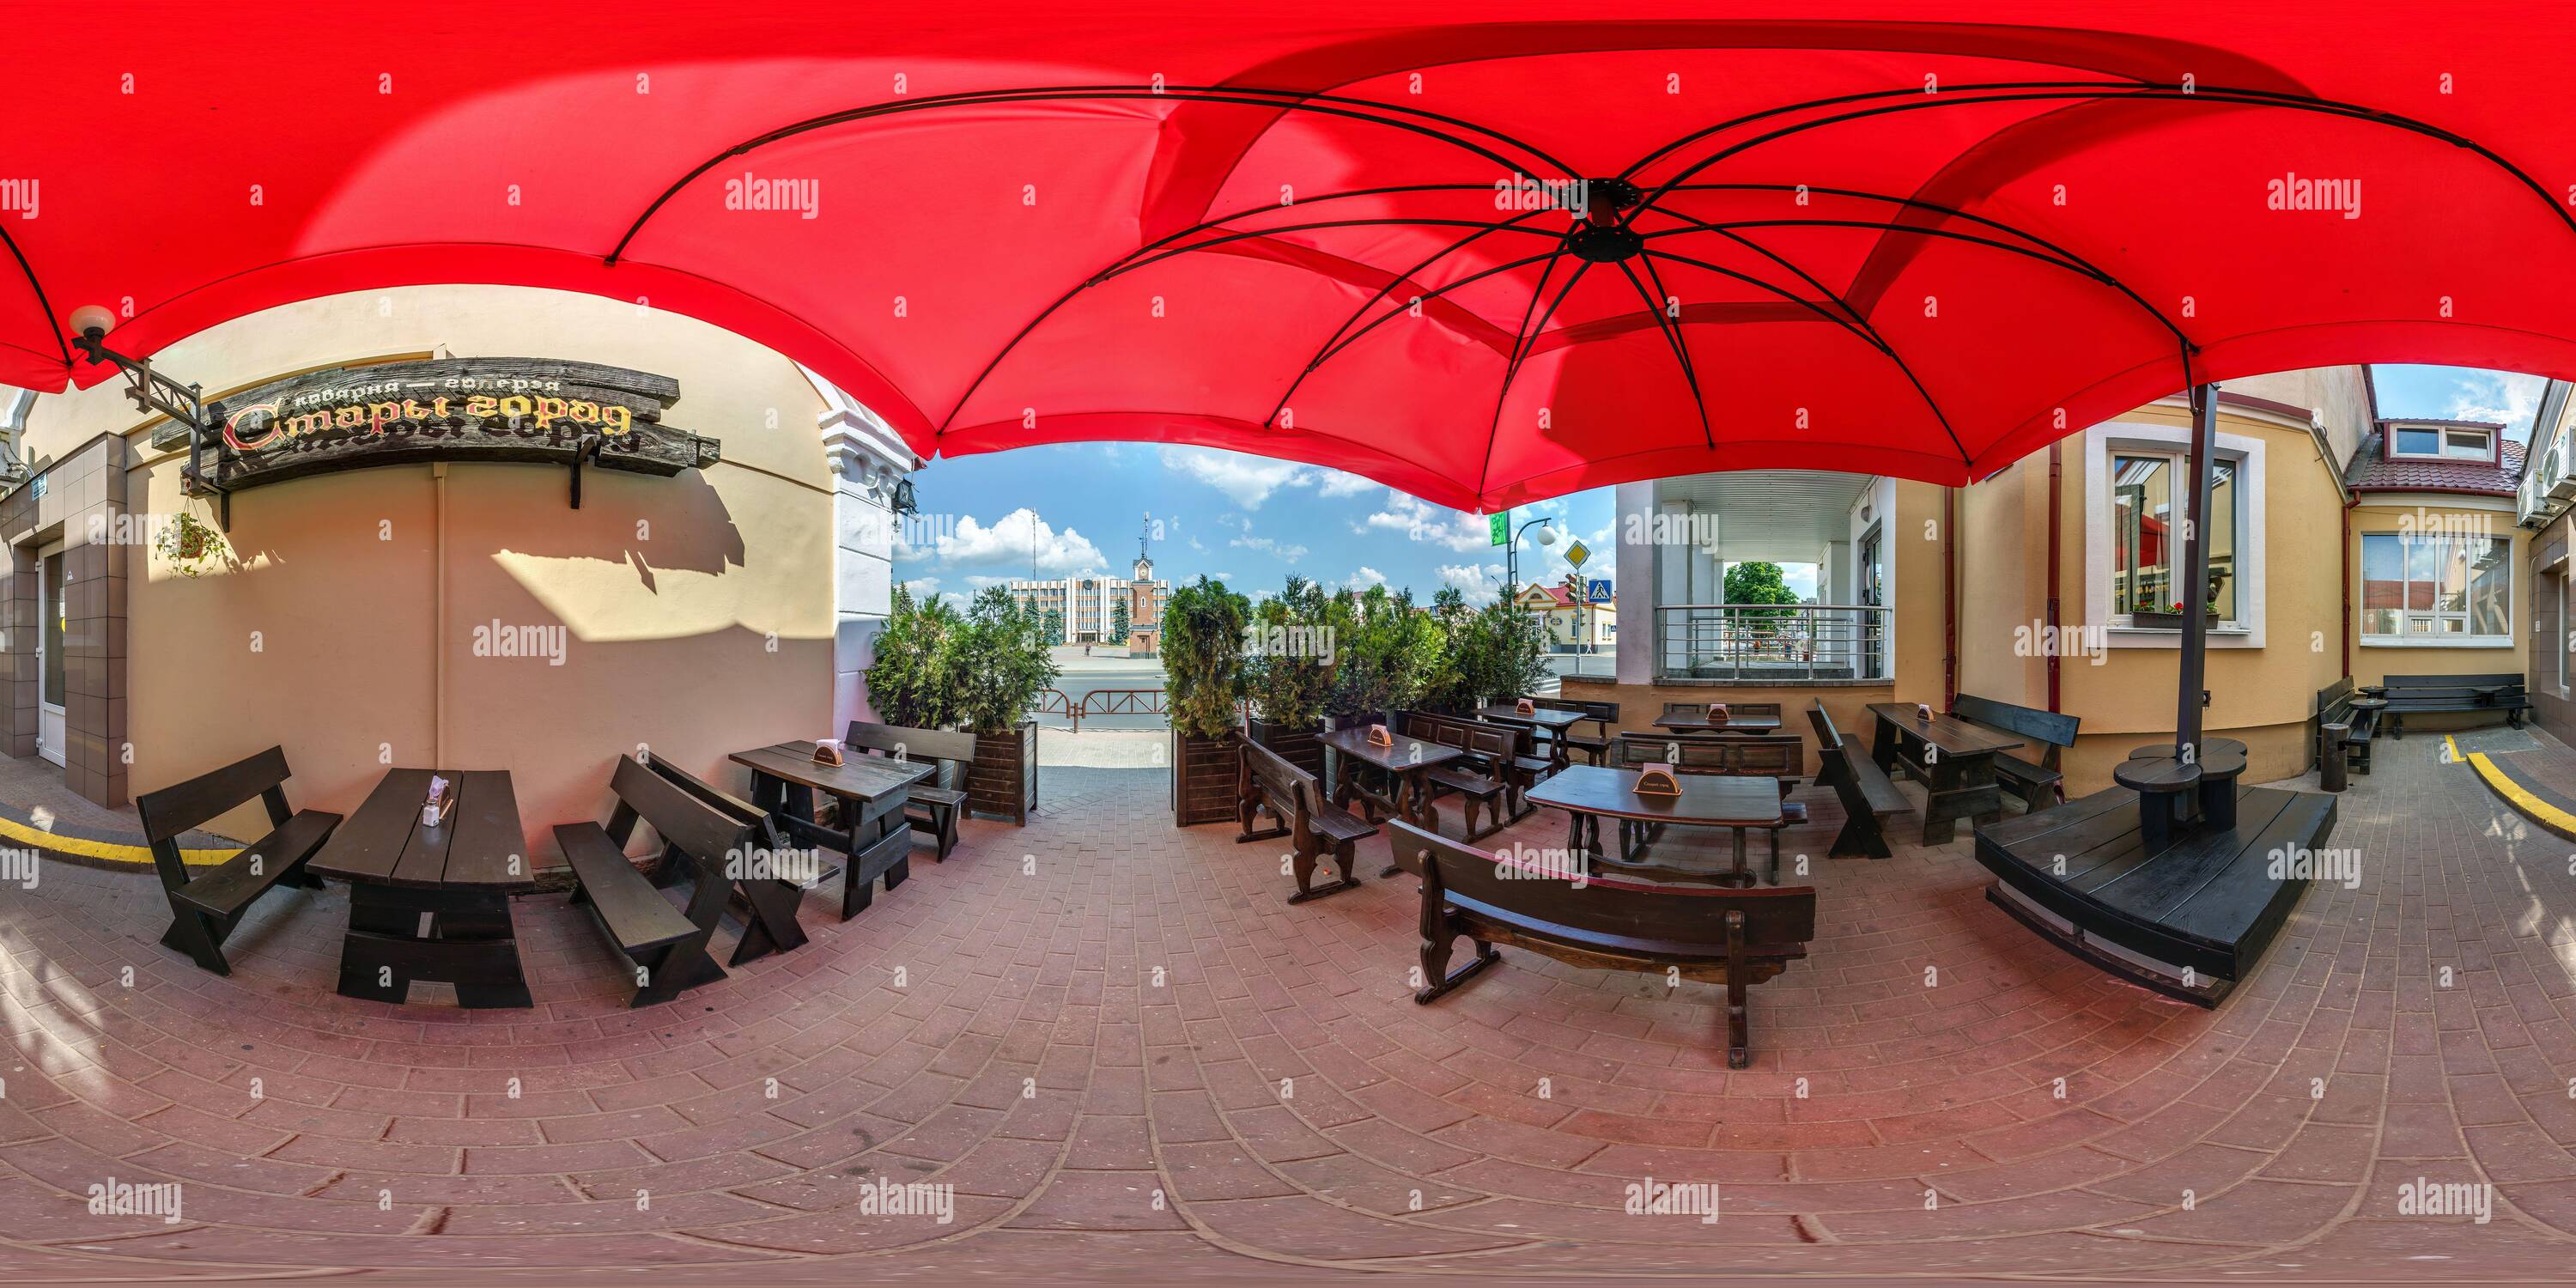 360 degree panoramic view of GRODNO, BELARUS - MAY 2019: Full spherical seamless hdri panorama 360 degrees in summer terrace in cafe of city center under an umbrella in equirectan